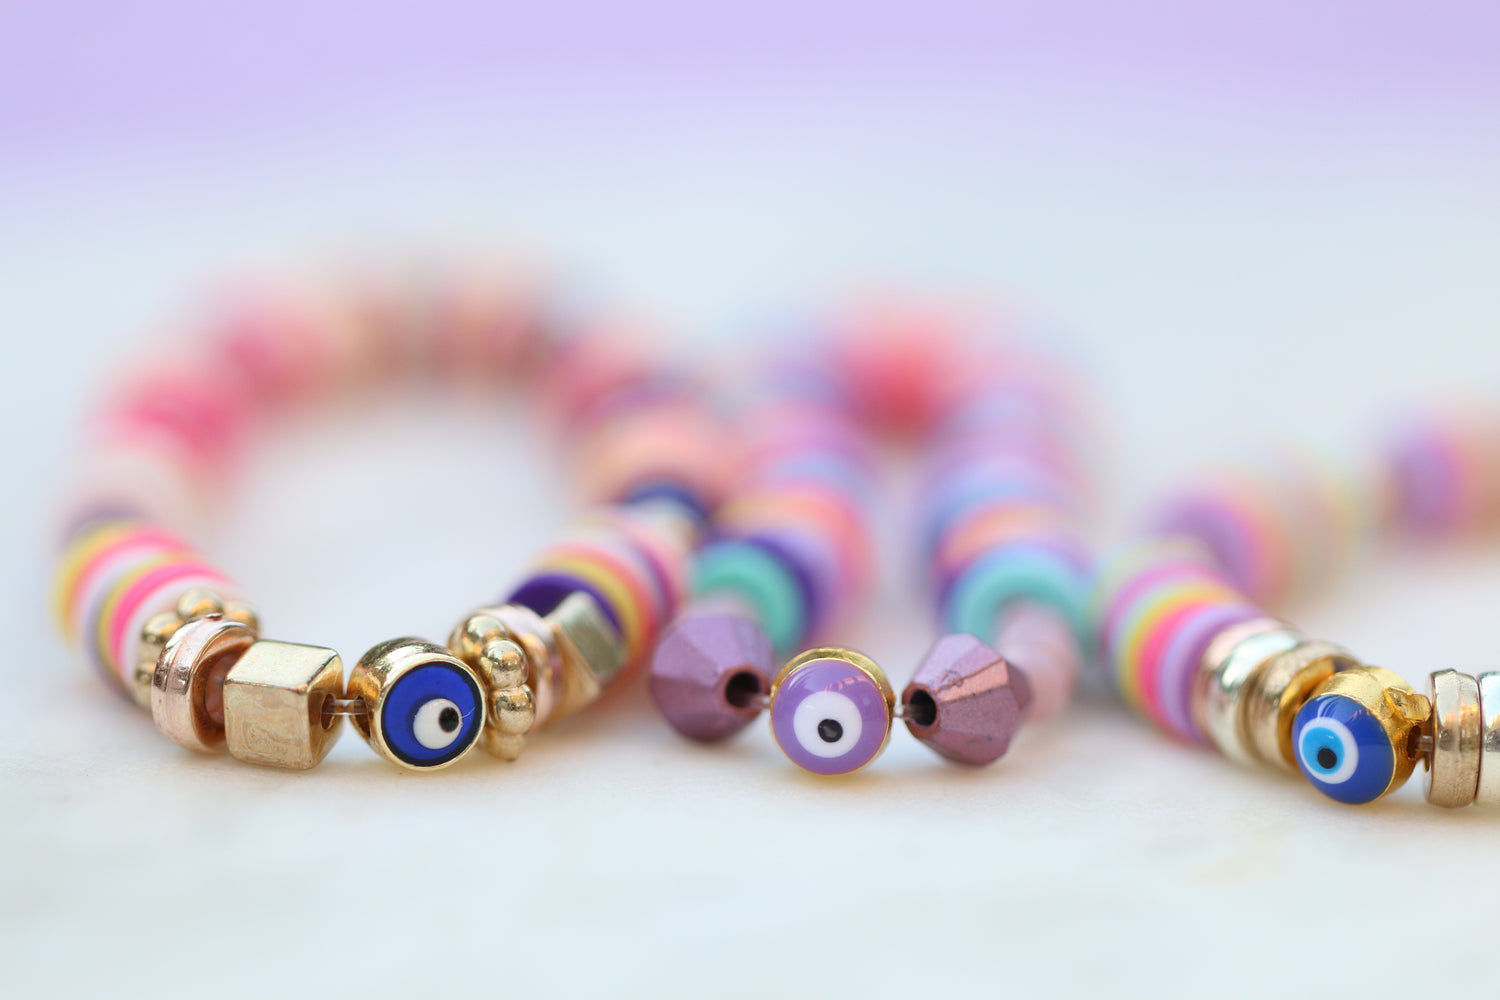 zoomed in image of 3 bracelets in bright pink purple and blue colors with an evil eye in blue and purple in the middle of each bracelet